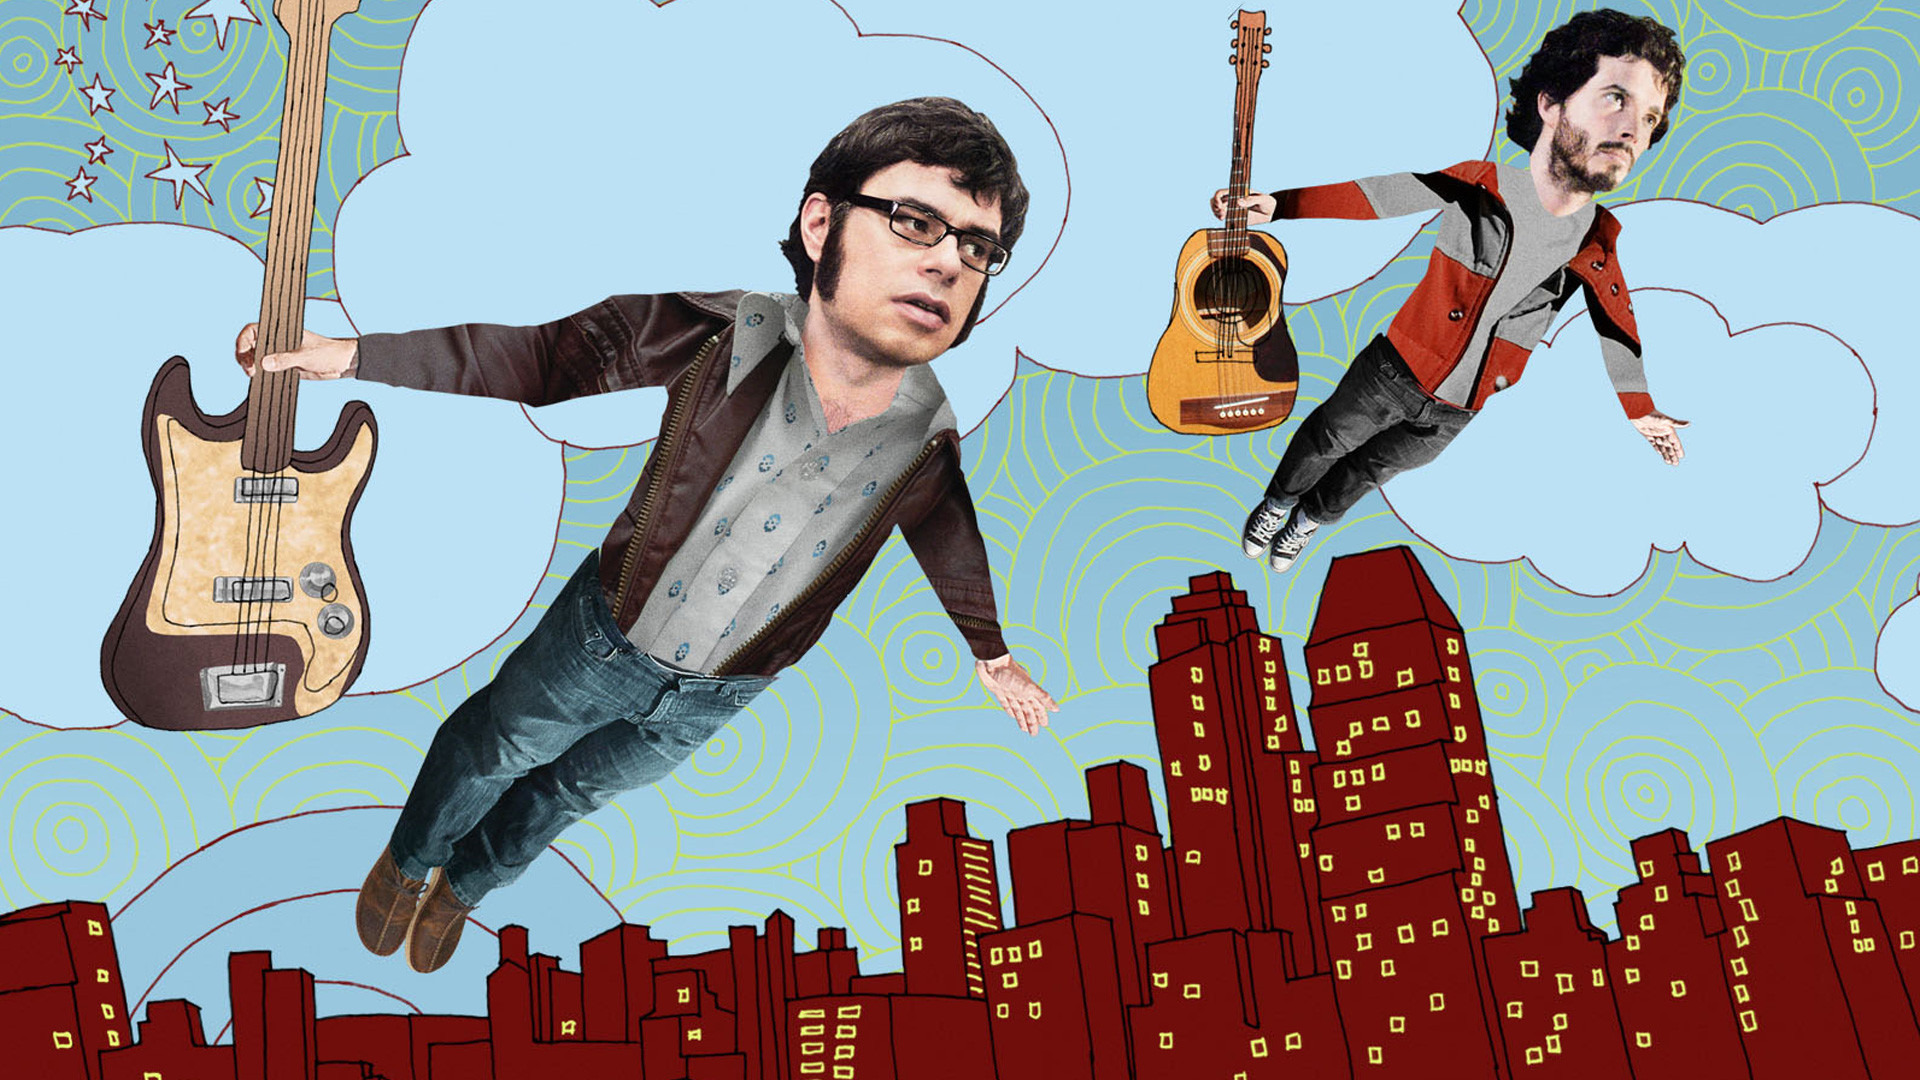 Show Flight of the Conchords